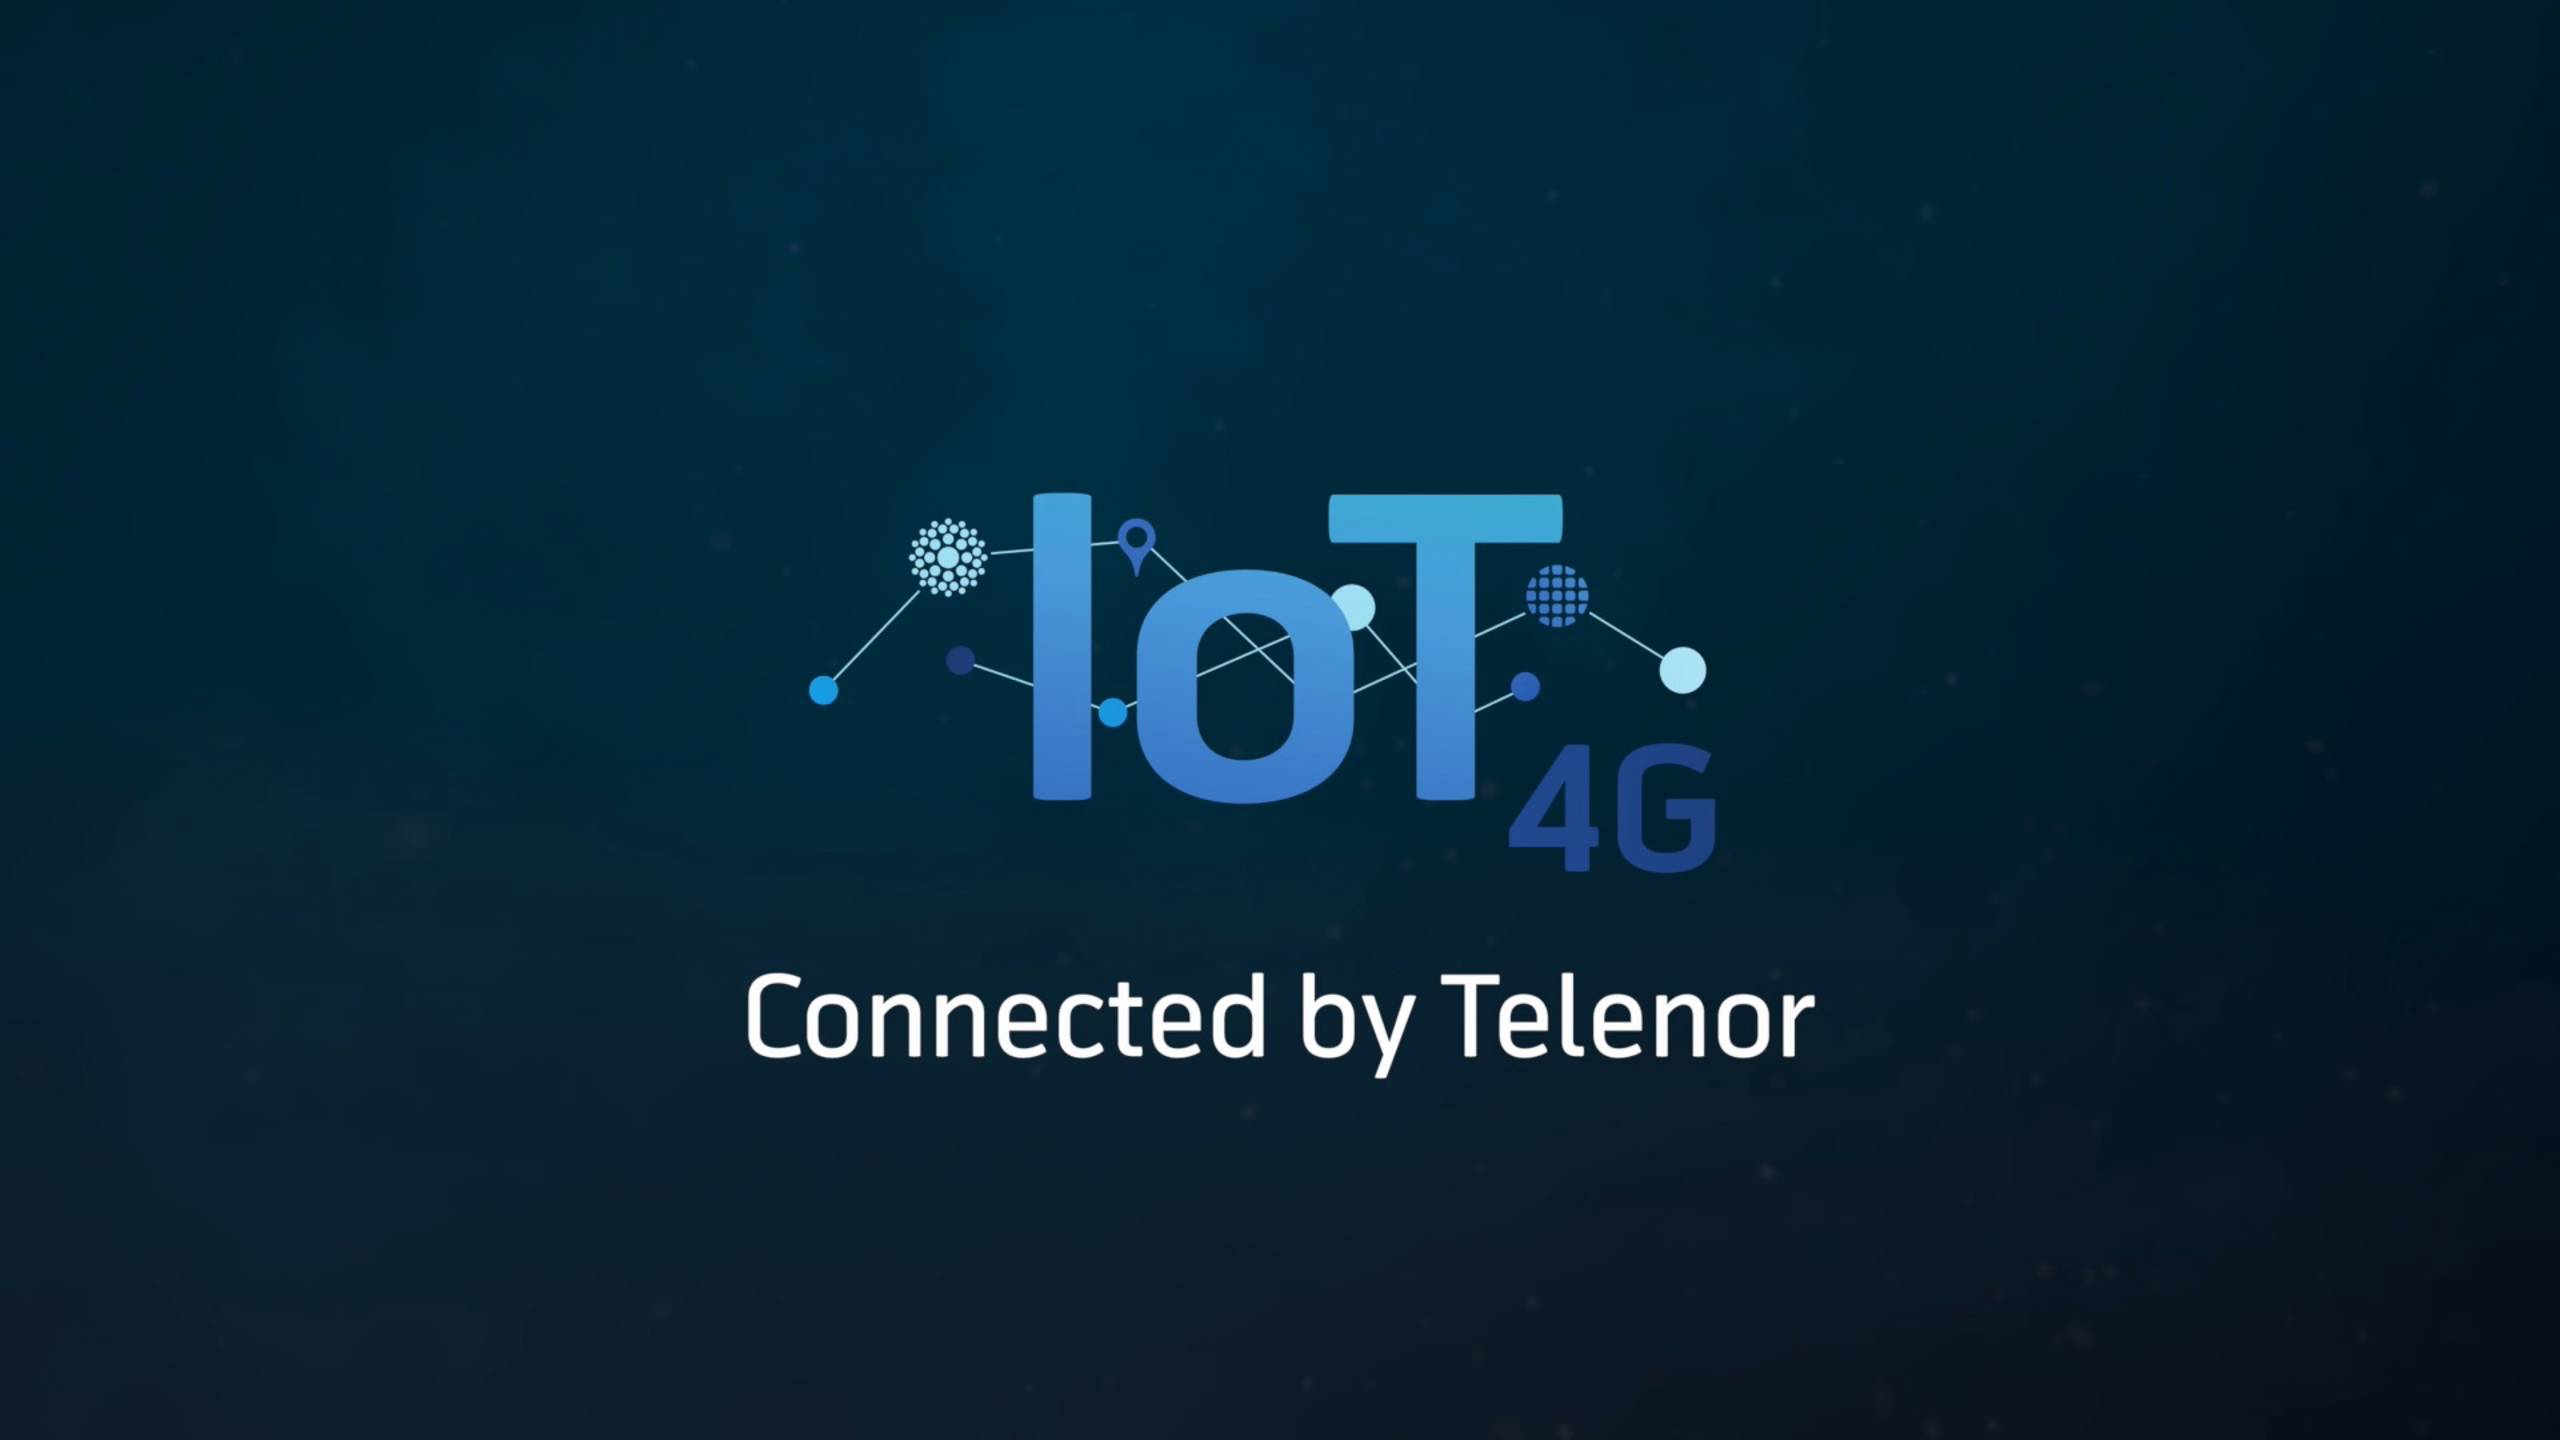 Black background with text saying: IoT 4G, connected by Telenor